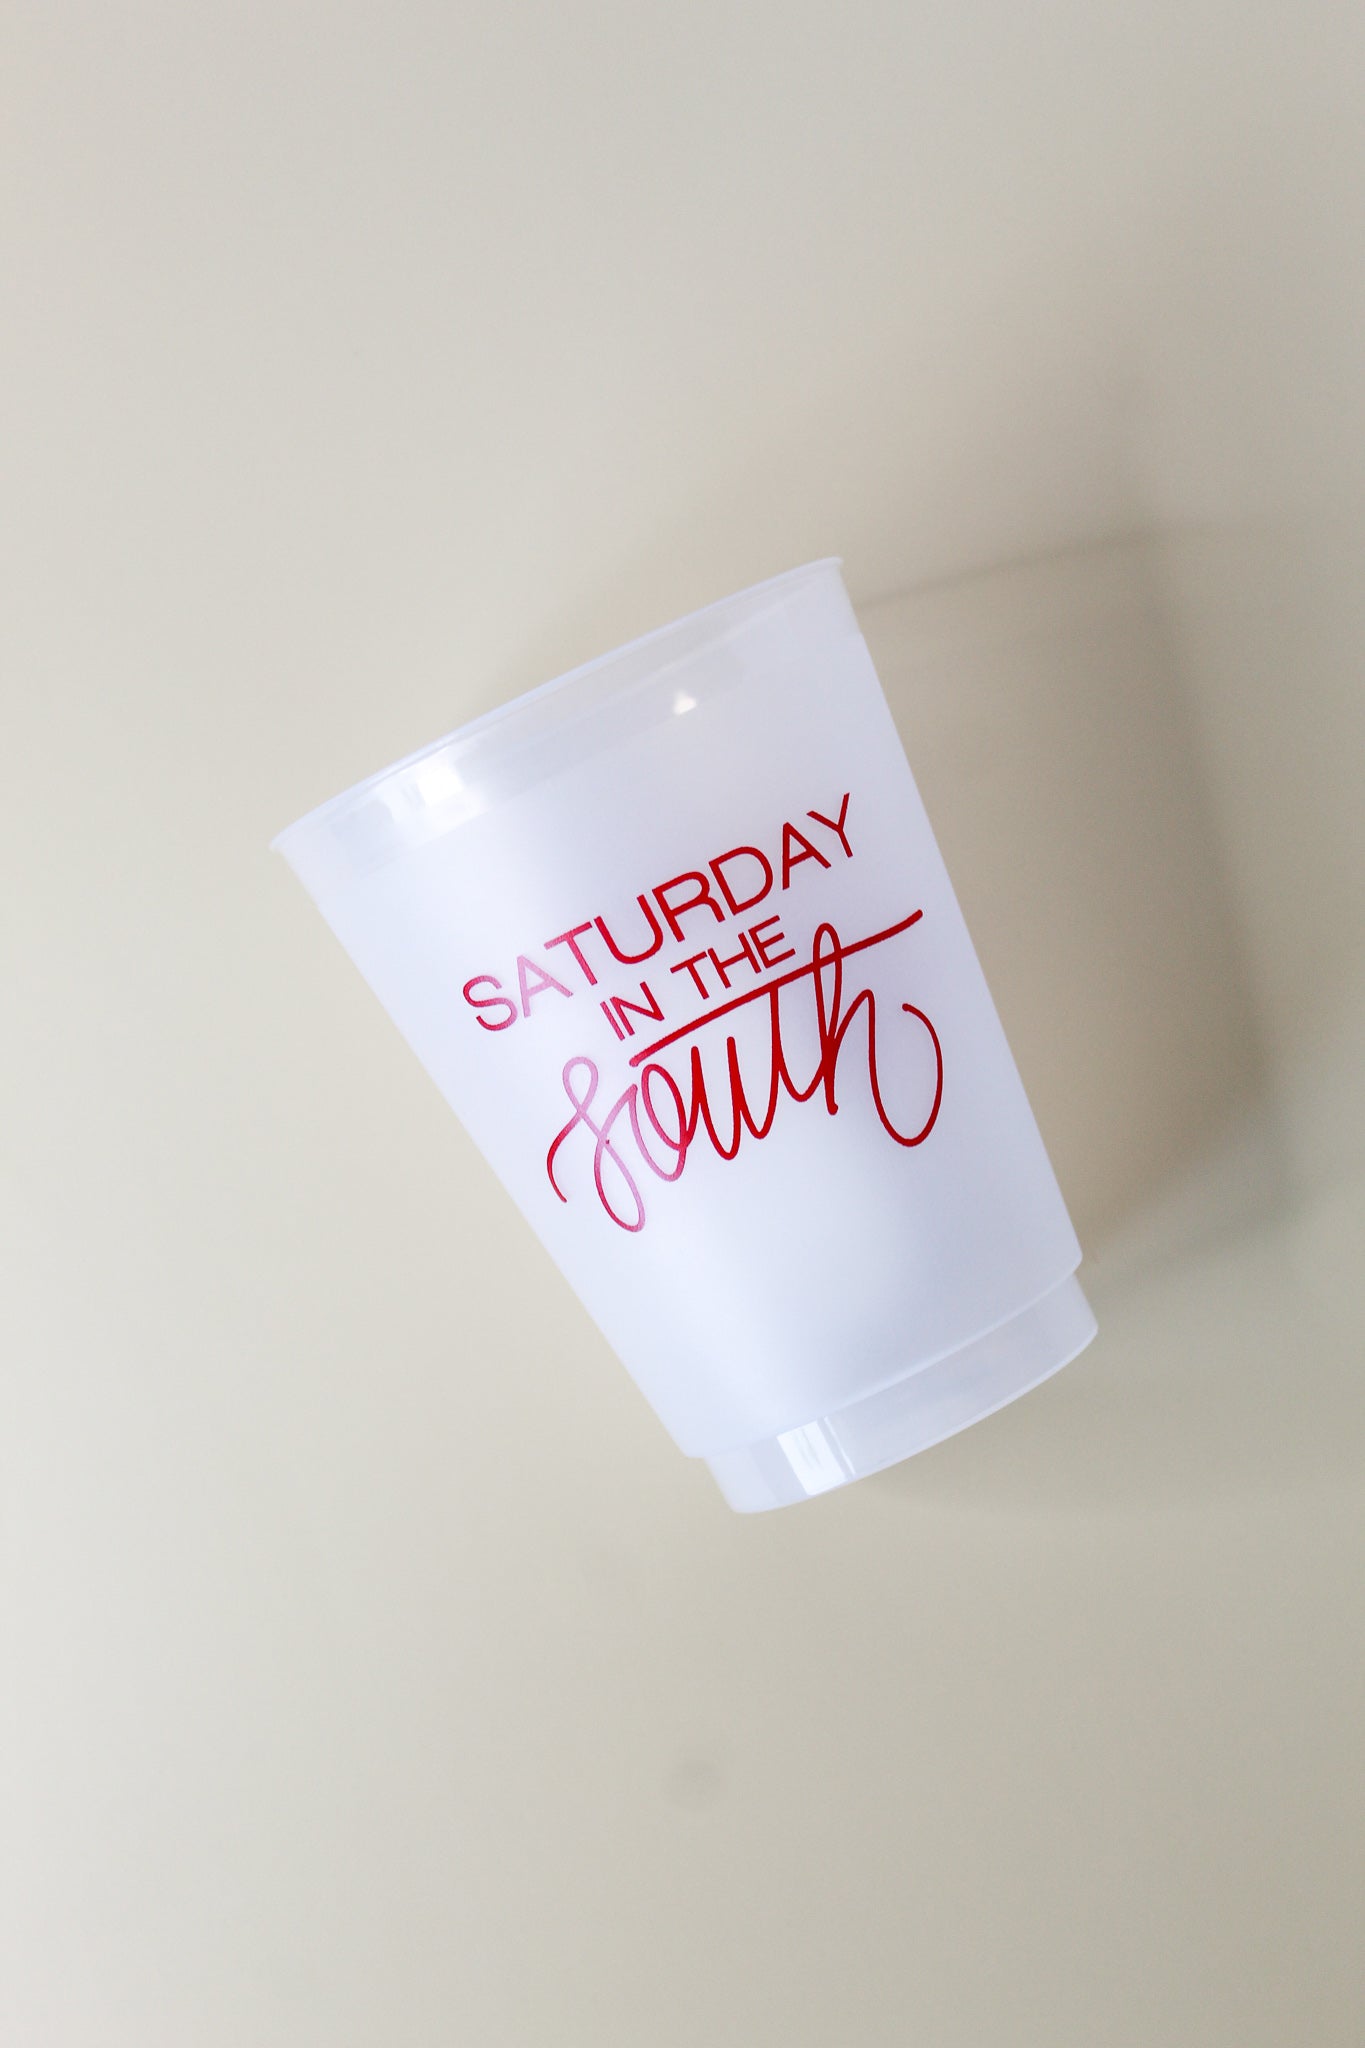 red 'Saturday In The South' cup, Tailgate party Cup, Football party cup